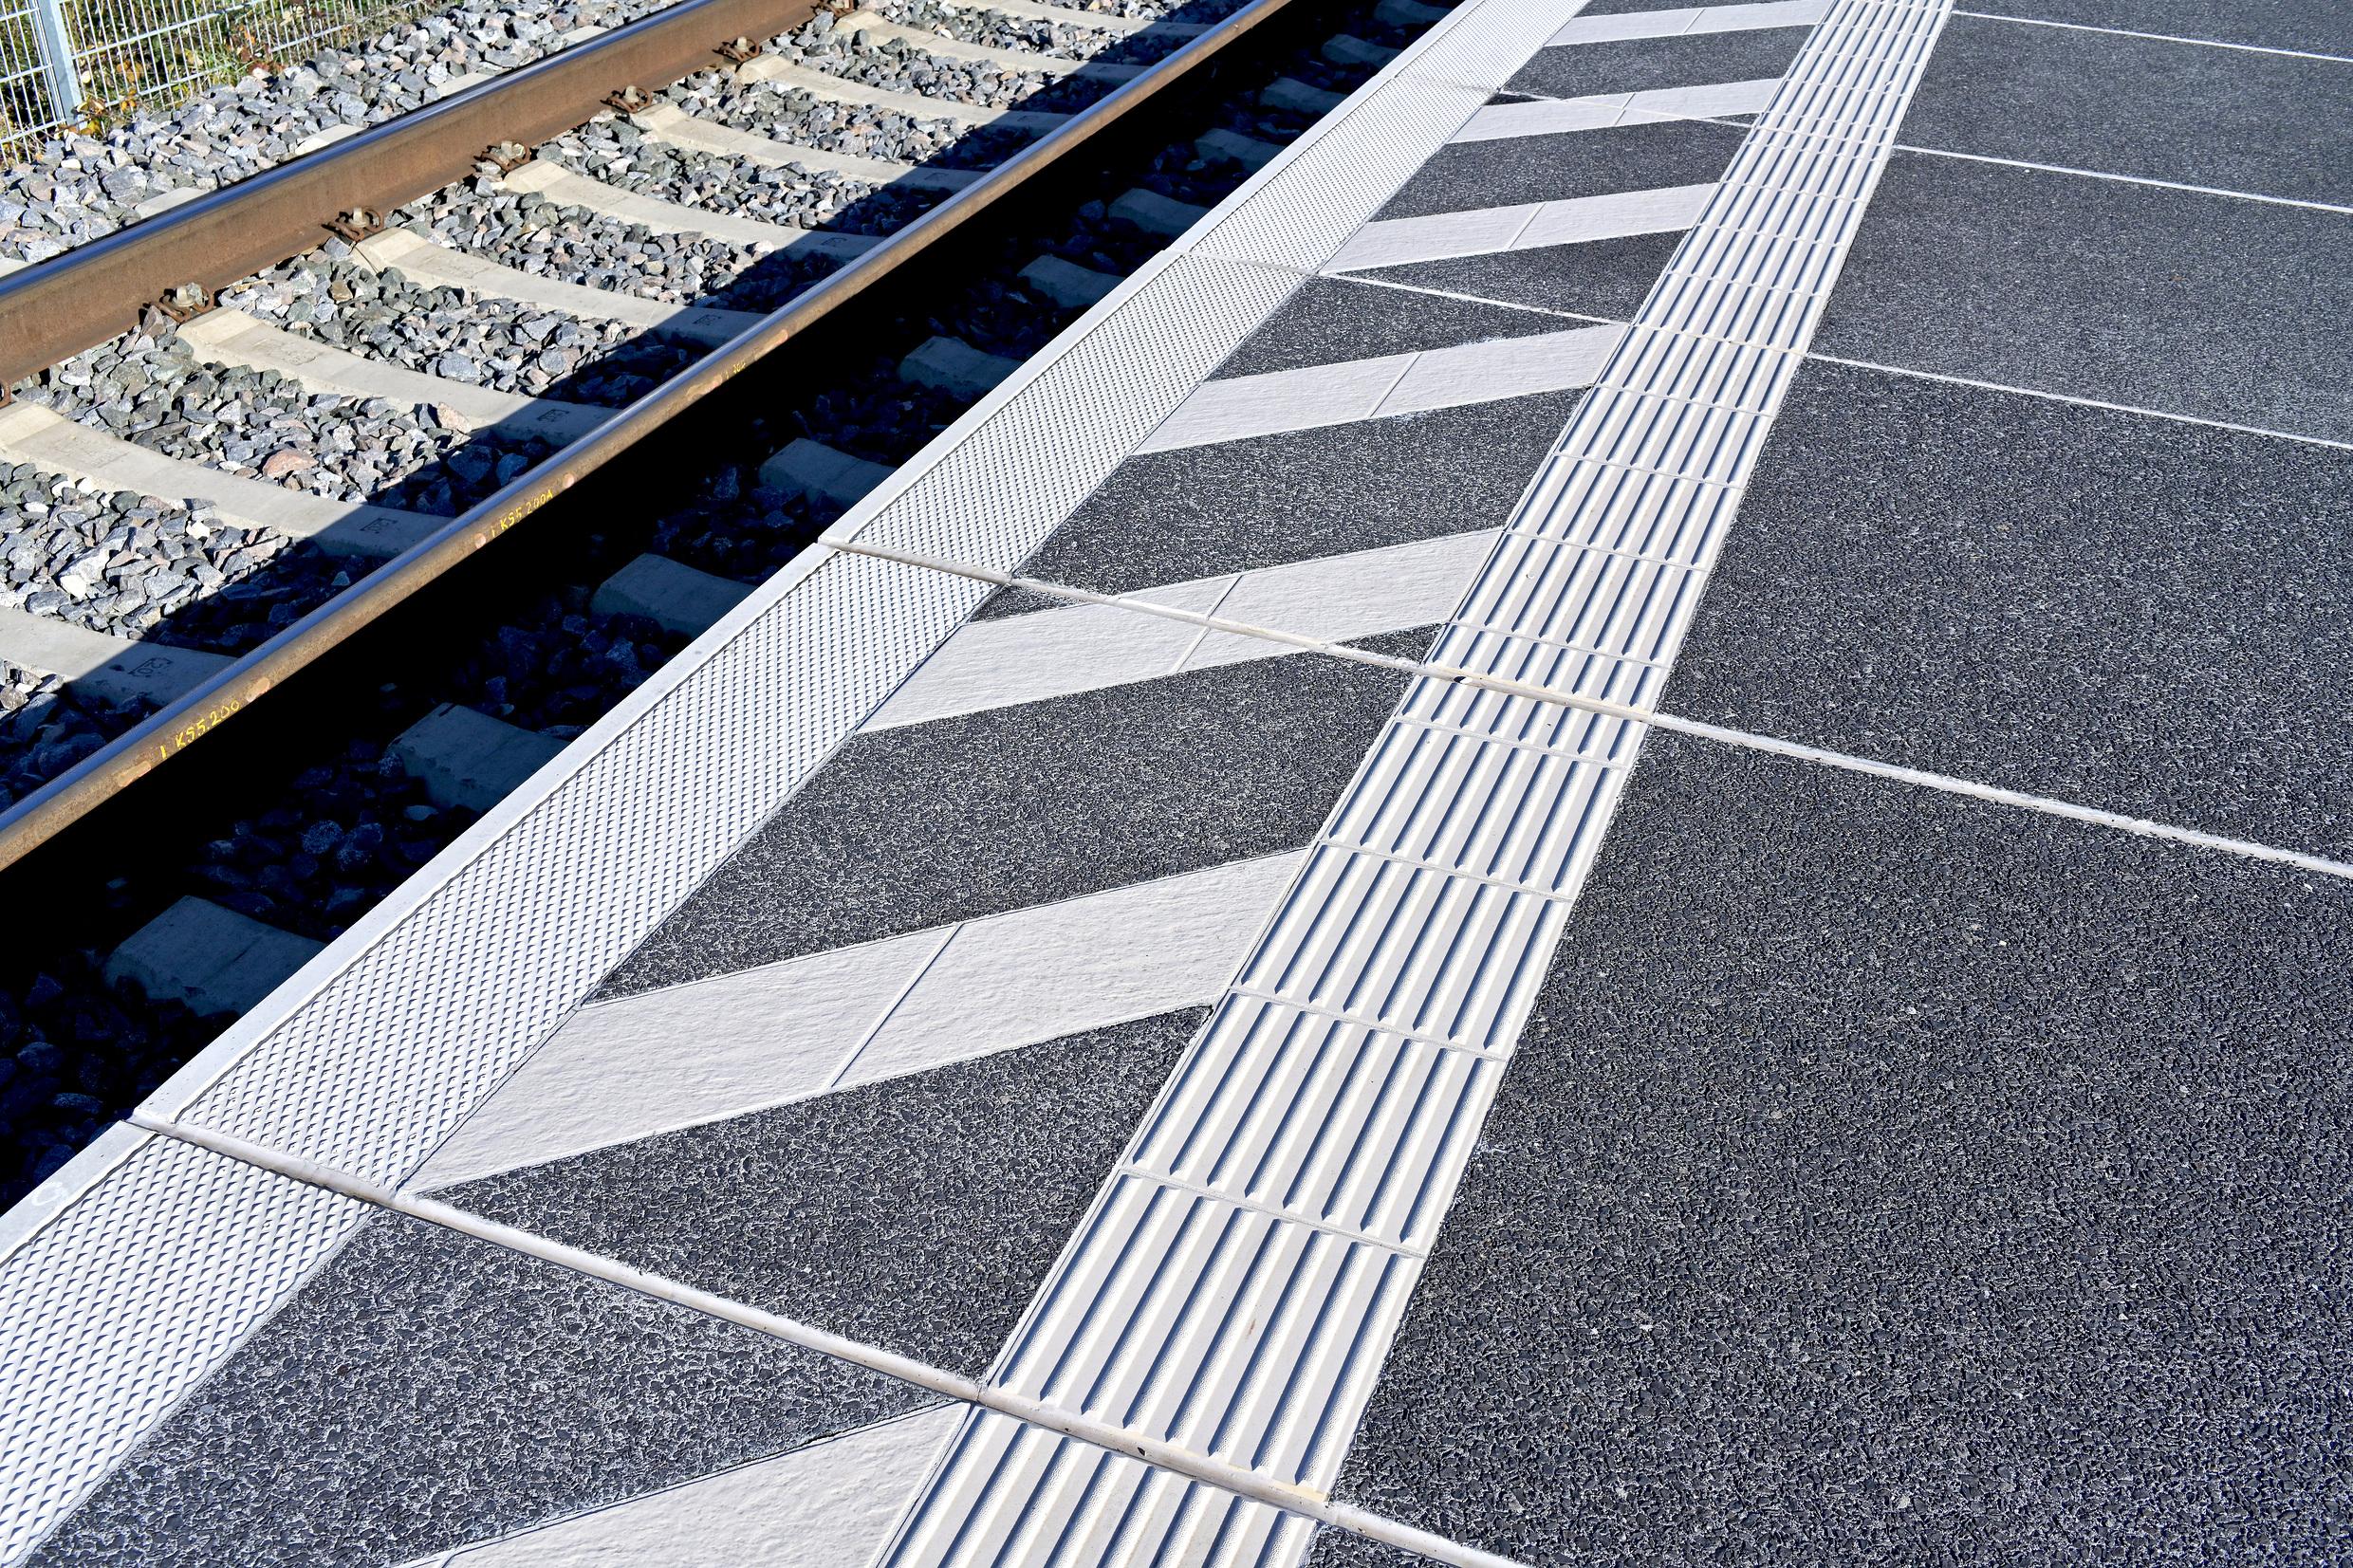 The detailed view of a railway platform with a guidance system for the blind.